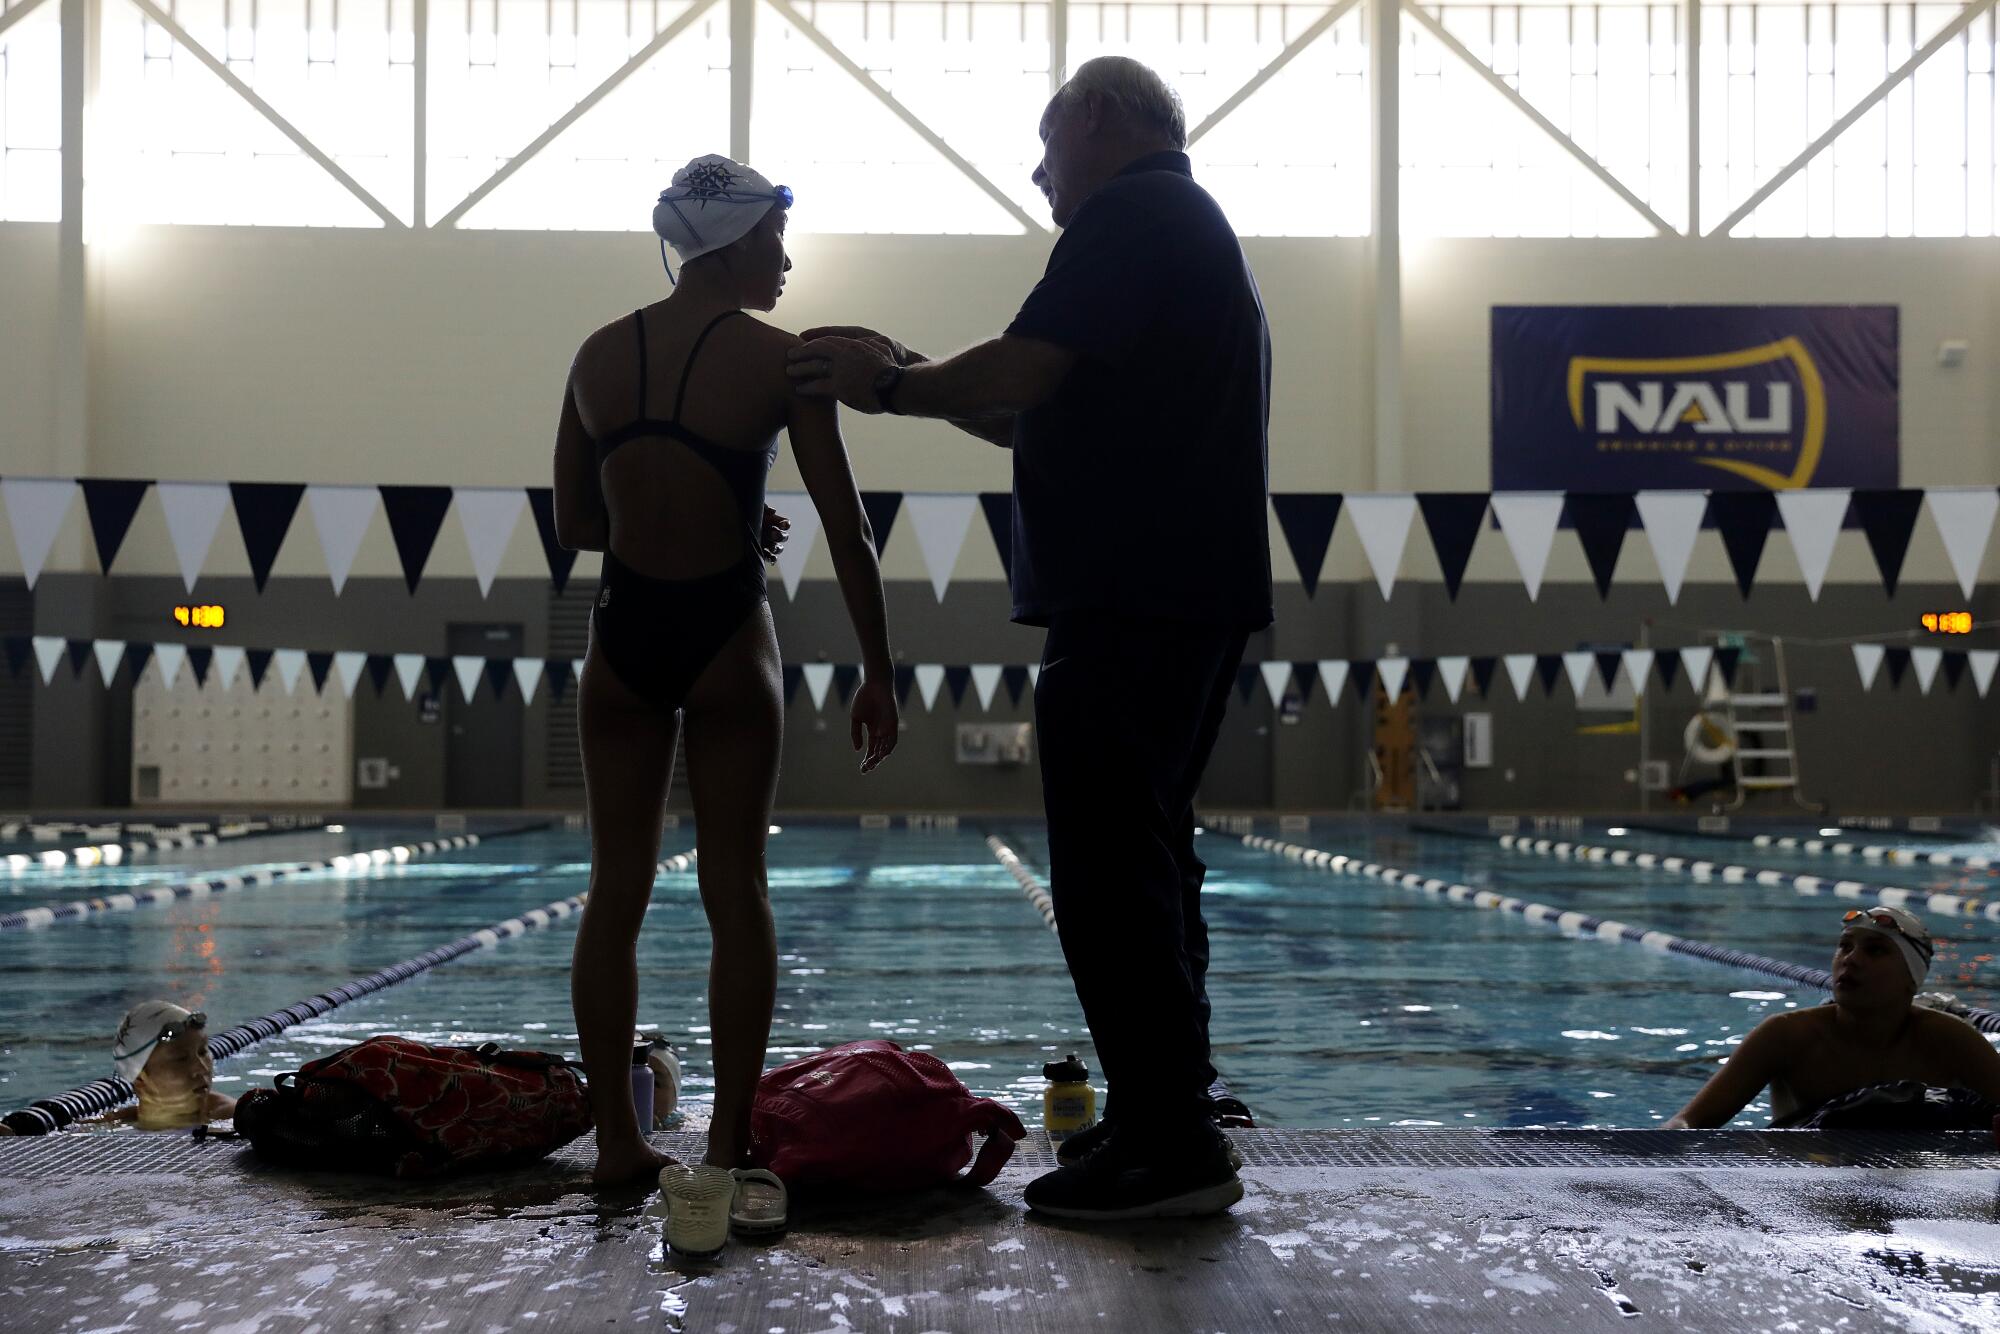 Coach Rick Shipherd checks in with Clemence Choy while they stand poolside.